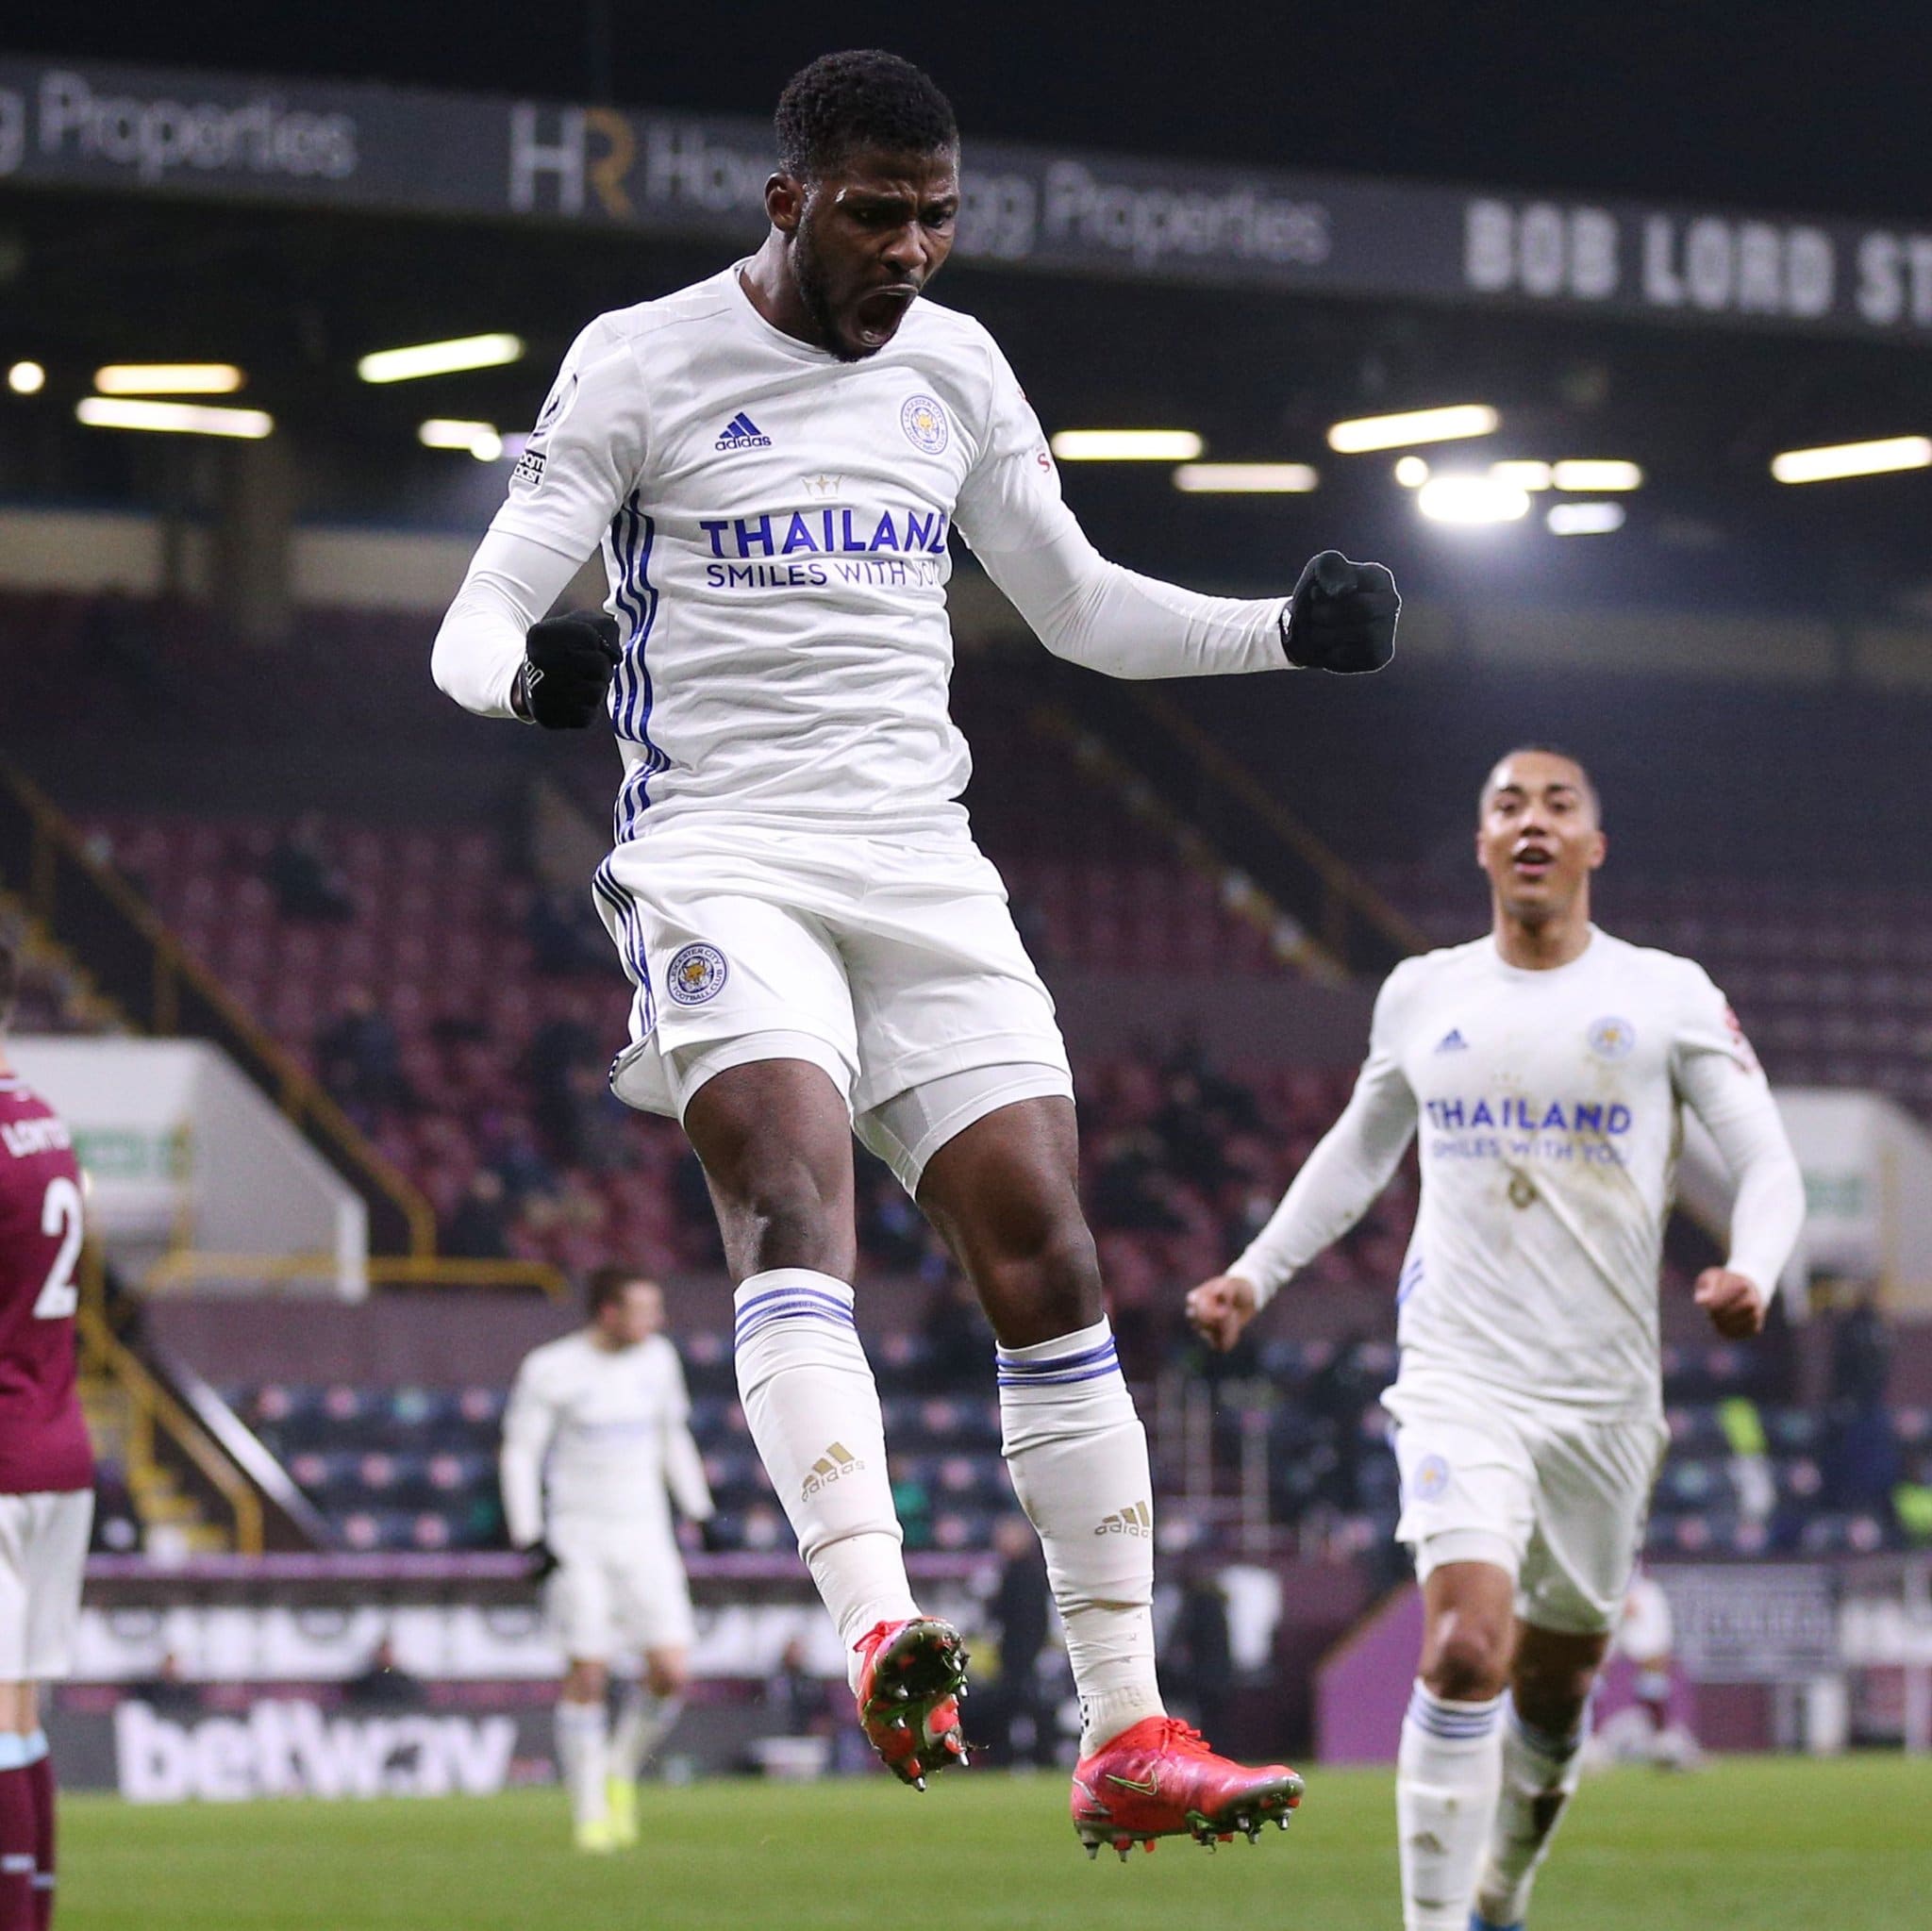 Premier League: Ndidi Provides Assist For Iheanacho In Leicester’s Draw At Burnley